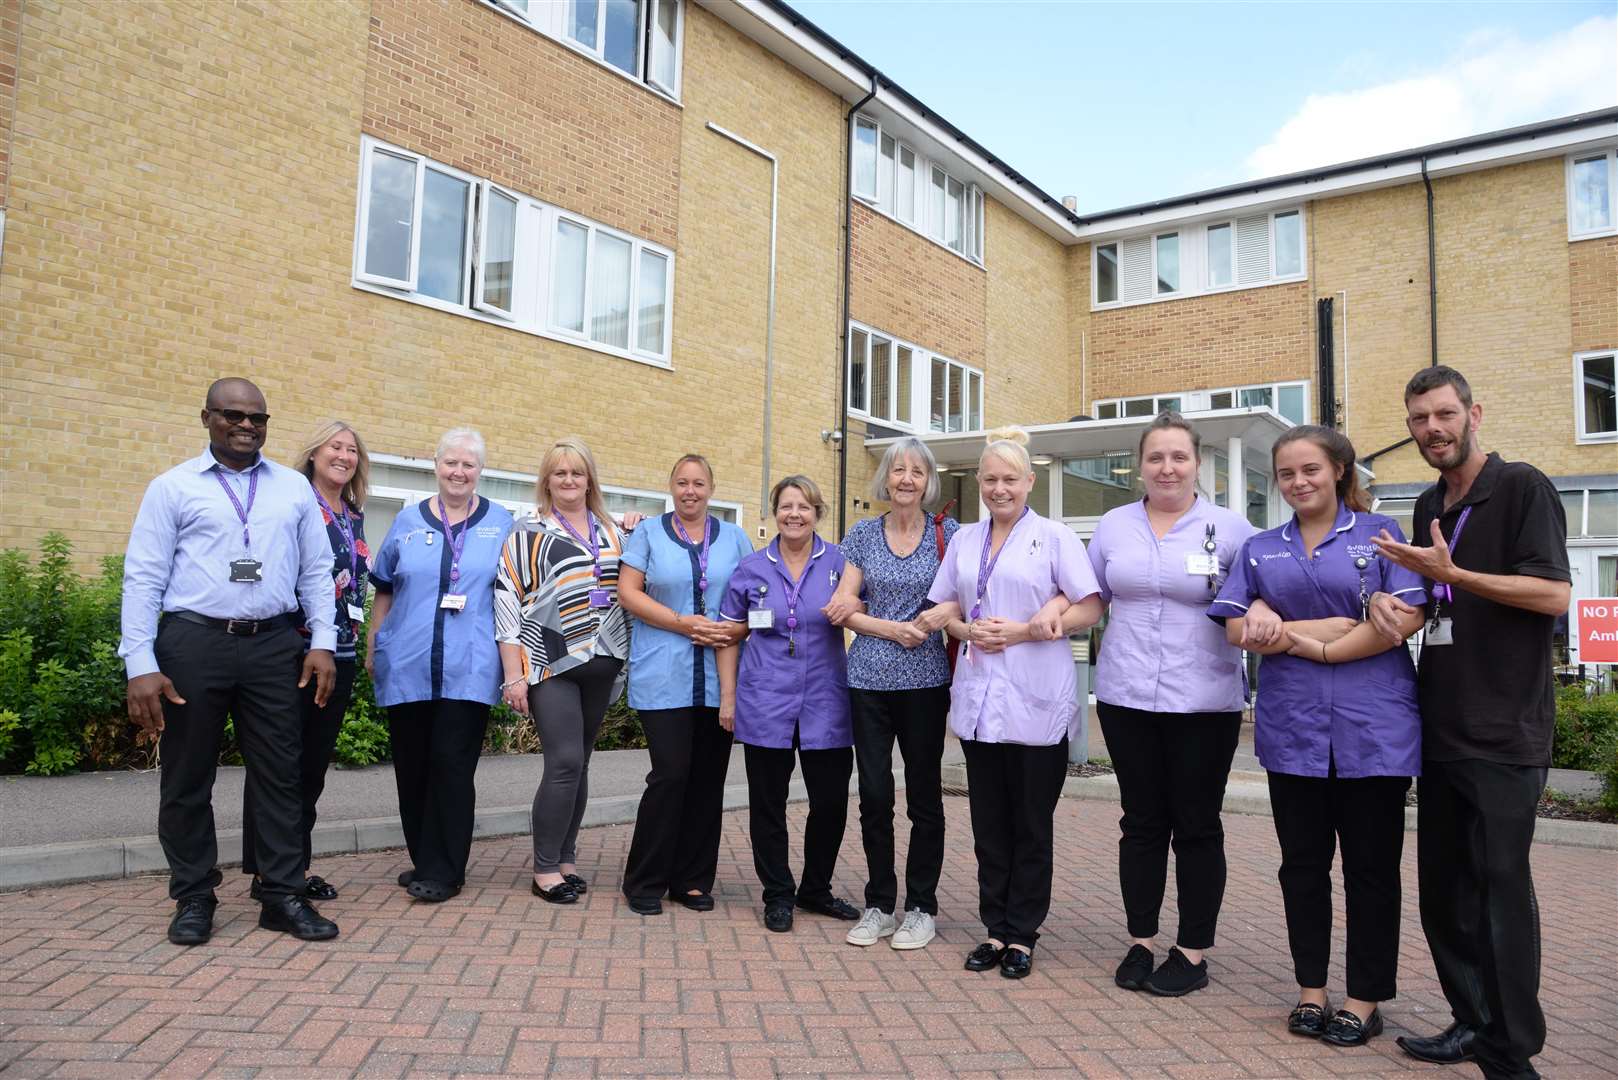 Staff celebrating at Amerherst Court care home in Palmerstom Rad, Chatham which has received and outstanding CQC report. Picture: Chris Davey. (3911874)